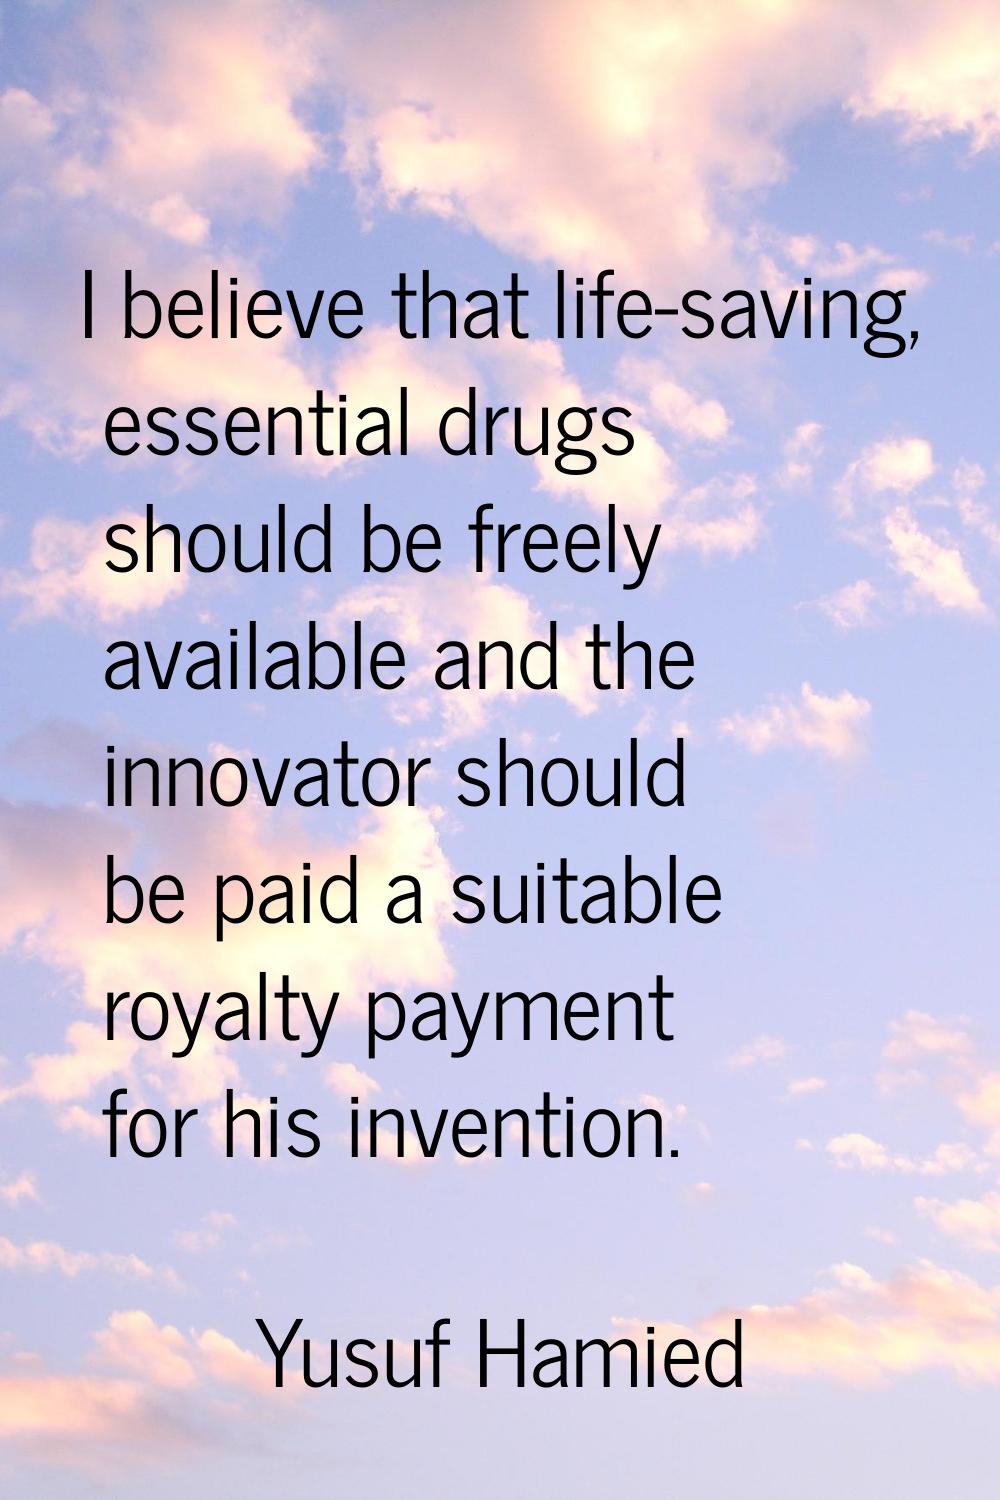 I believe that life-saving, essential drugs should be freely available and the innovator should be 